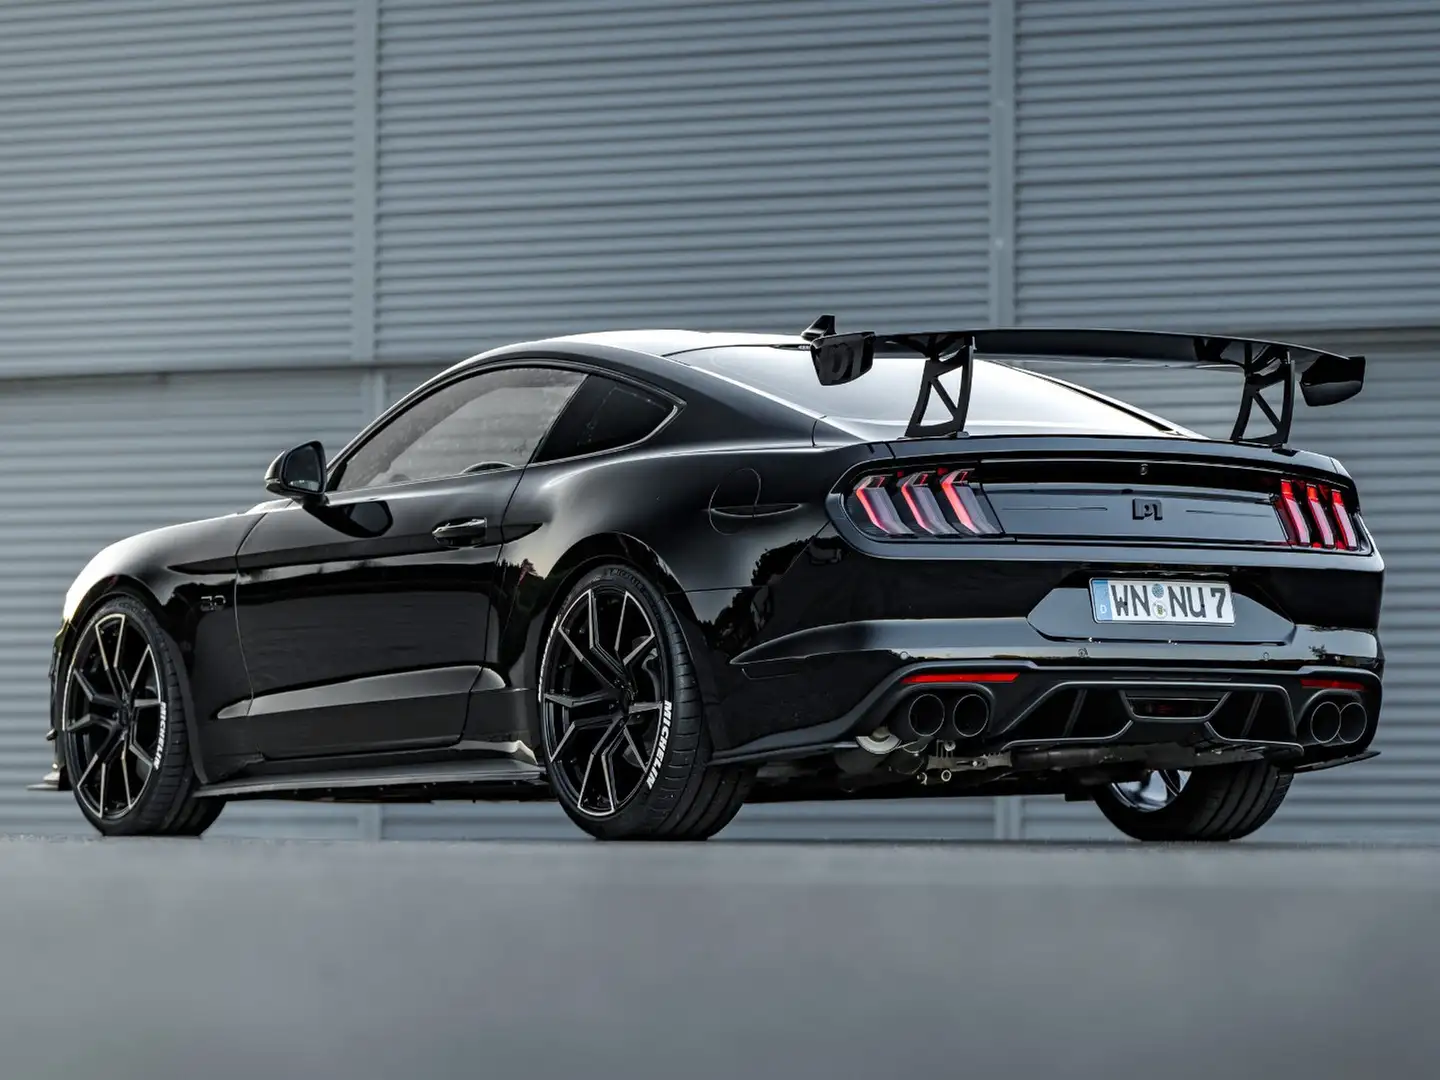 Ford Mustang GT 5.0 V8 Aut. Nuding Performance Umbau crna - 2